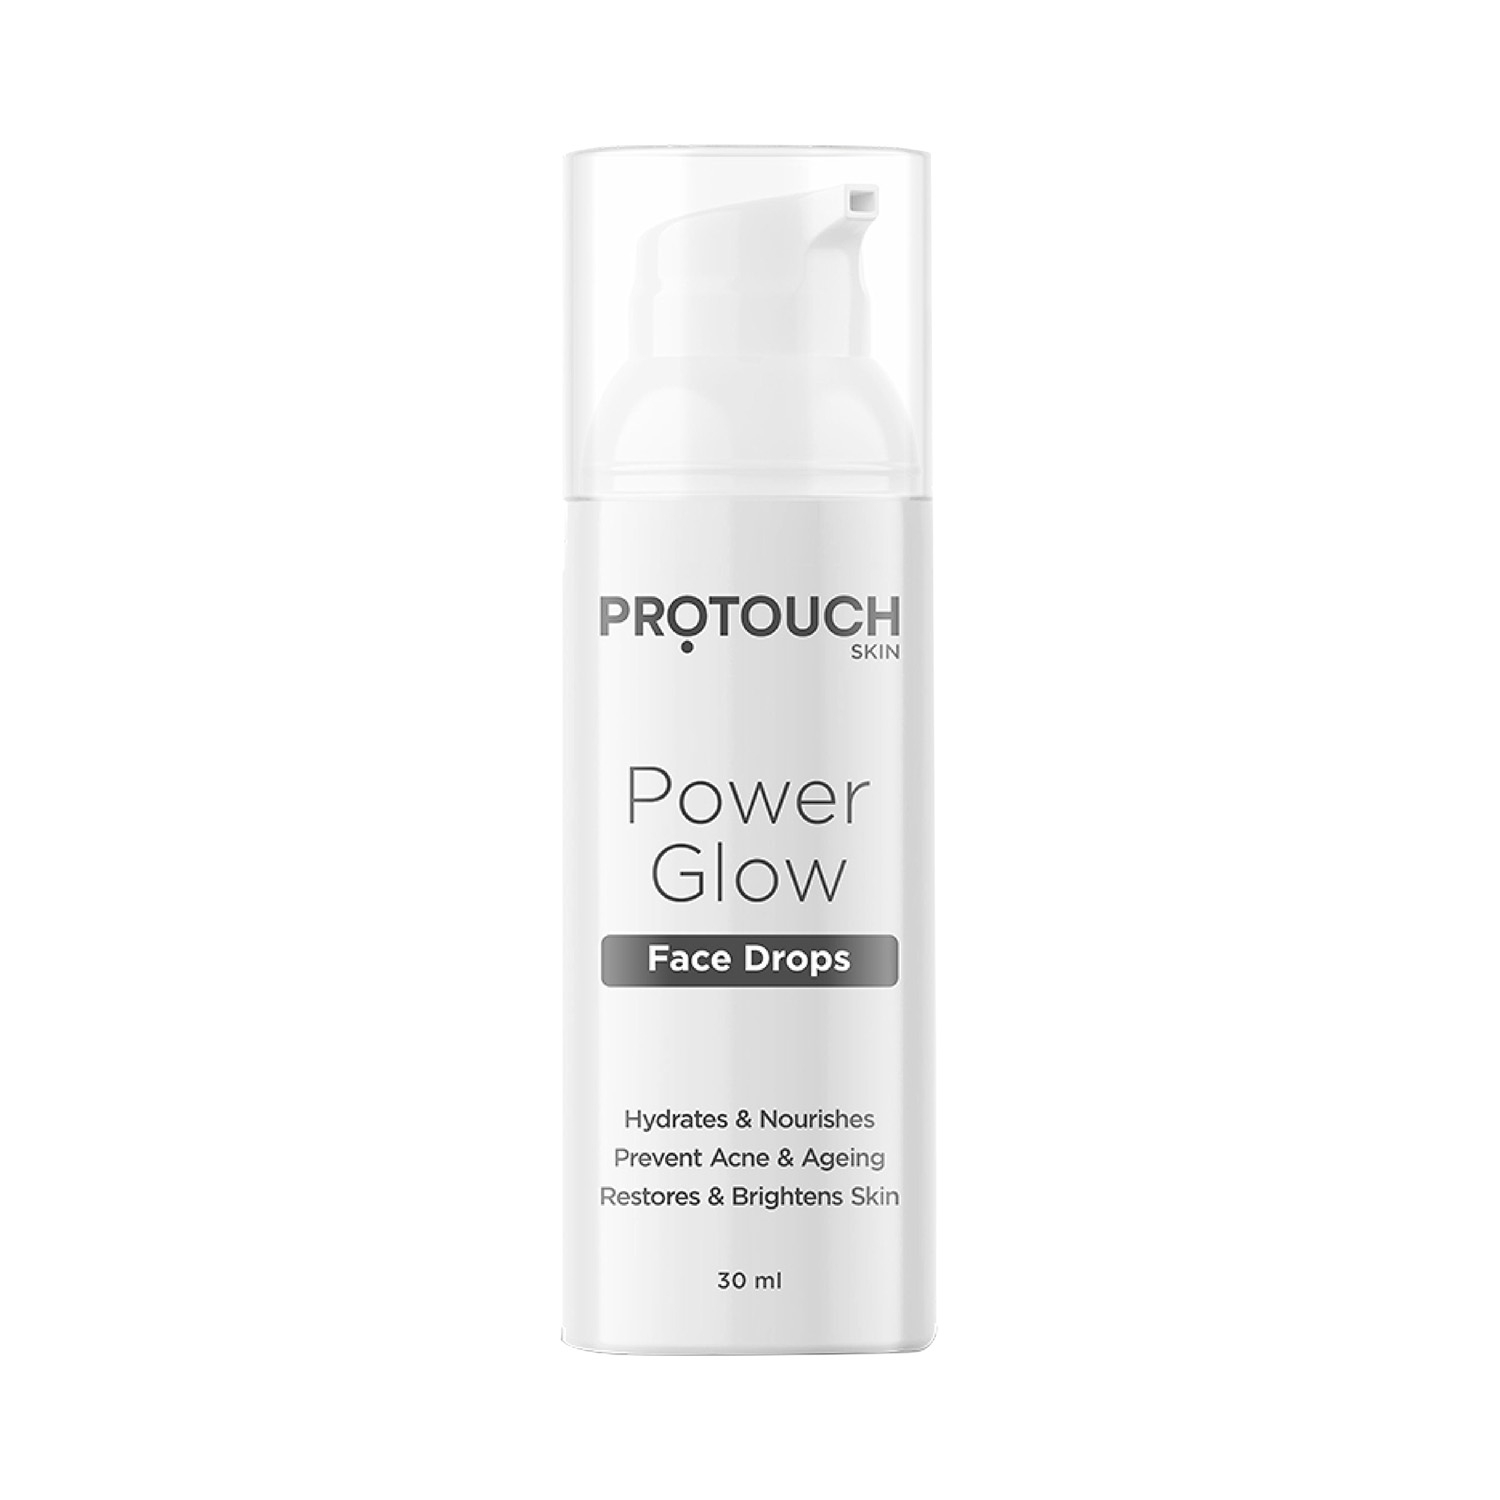 Protouch | Protouch Power Glow Face Drops, Non-Sticky, Deep Hydrating Face Moisturiser with Korean Actives